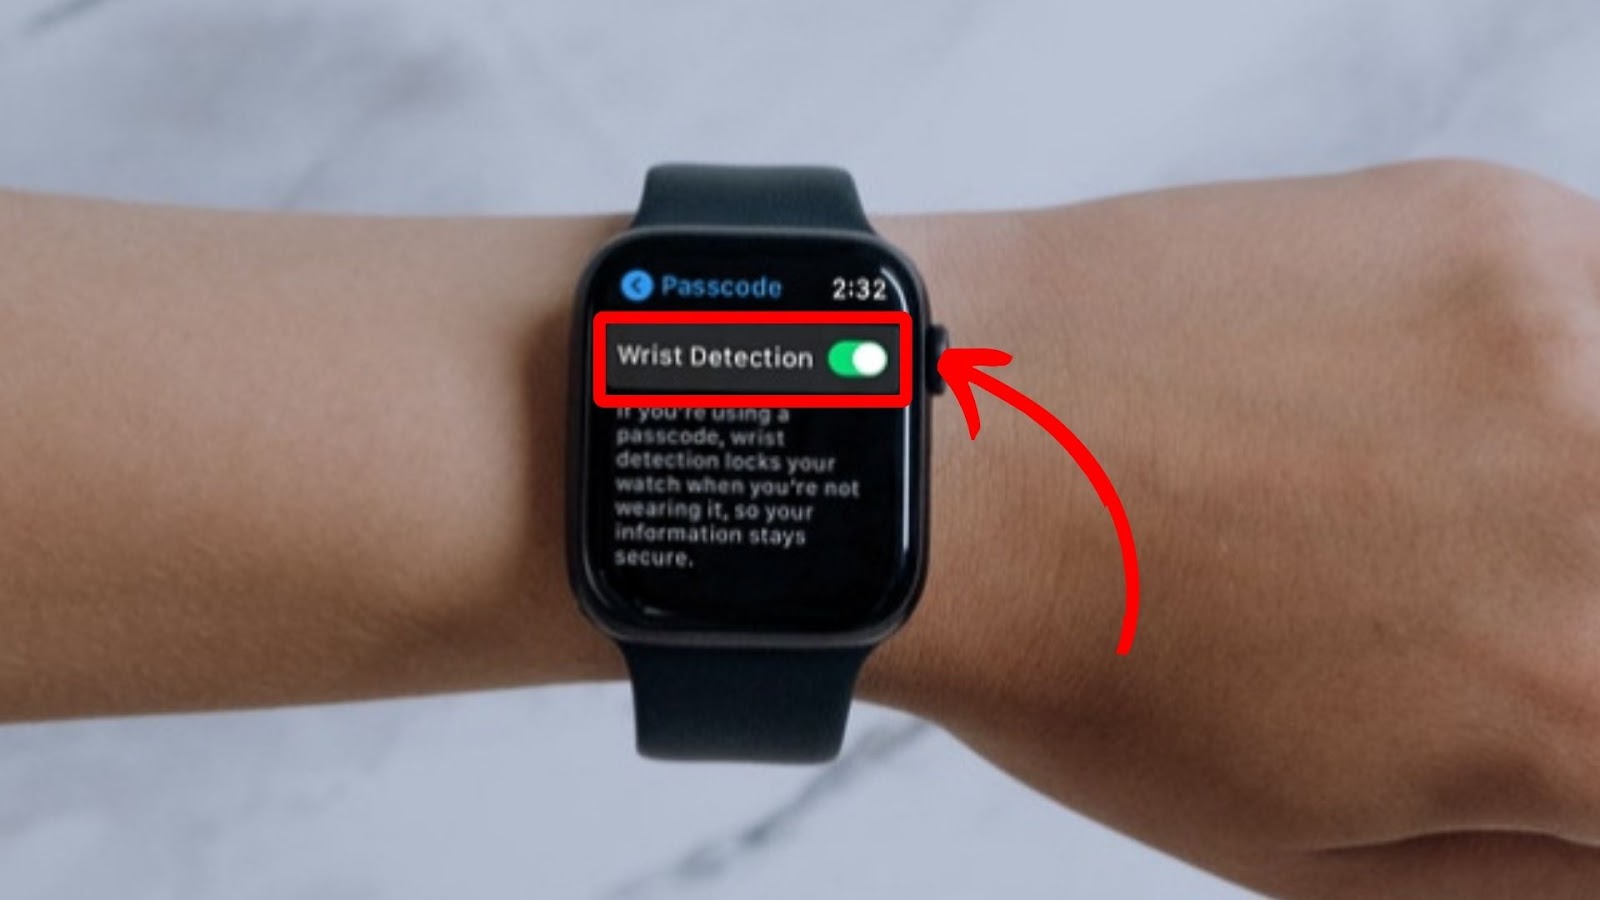 How To Enable Wrist Detection On Apple Watch